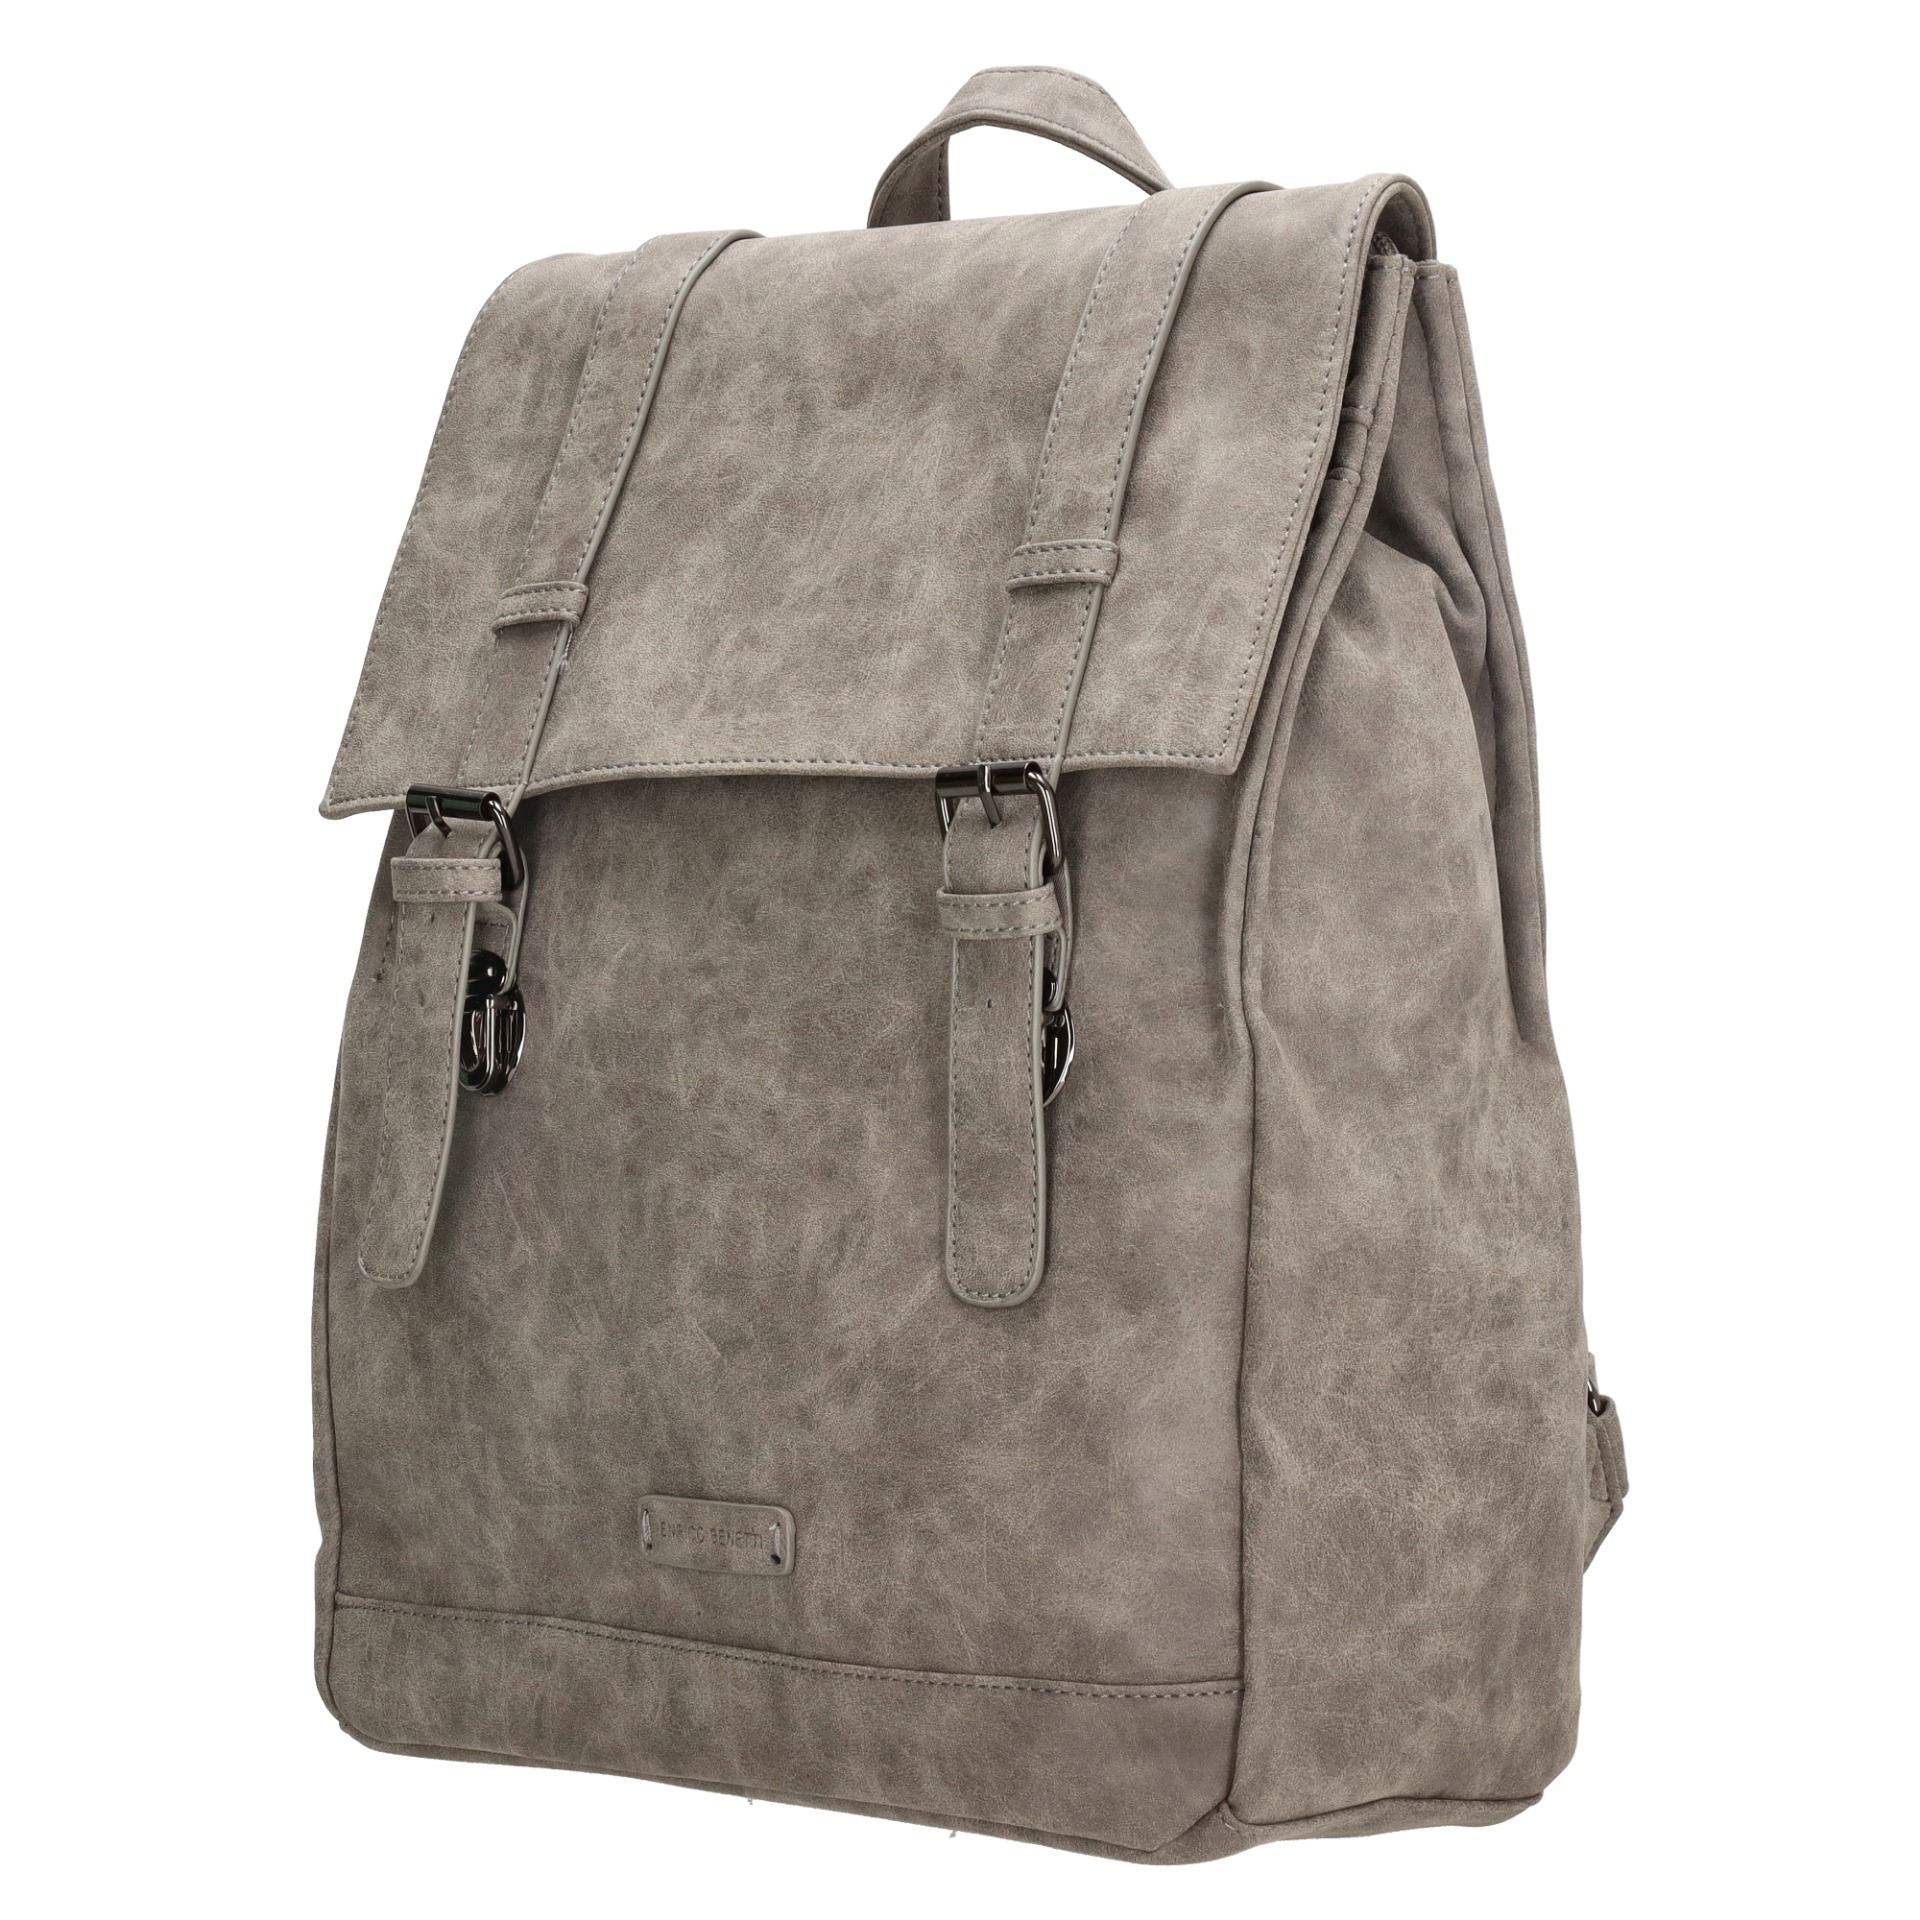 E-shop Enrico Benetti Amy Tablet Backpack Medium Taupe